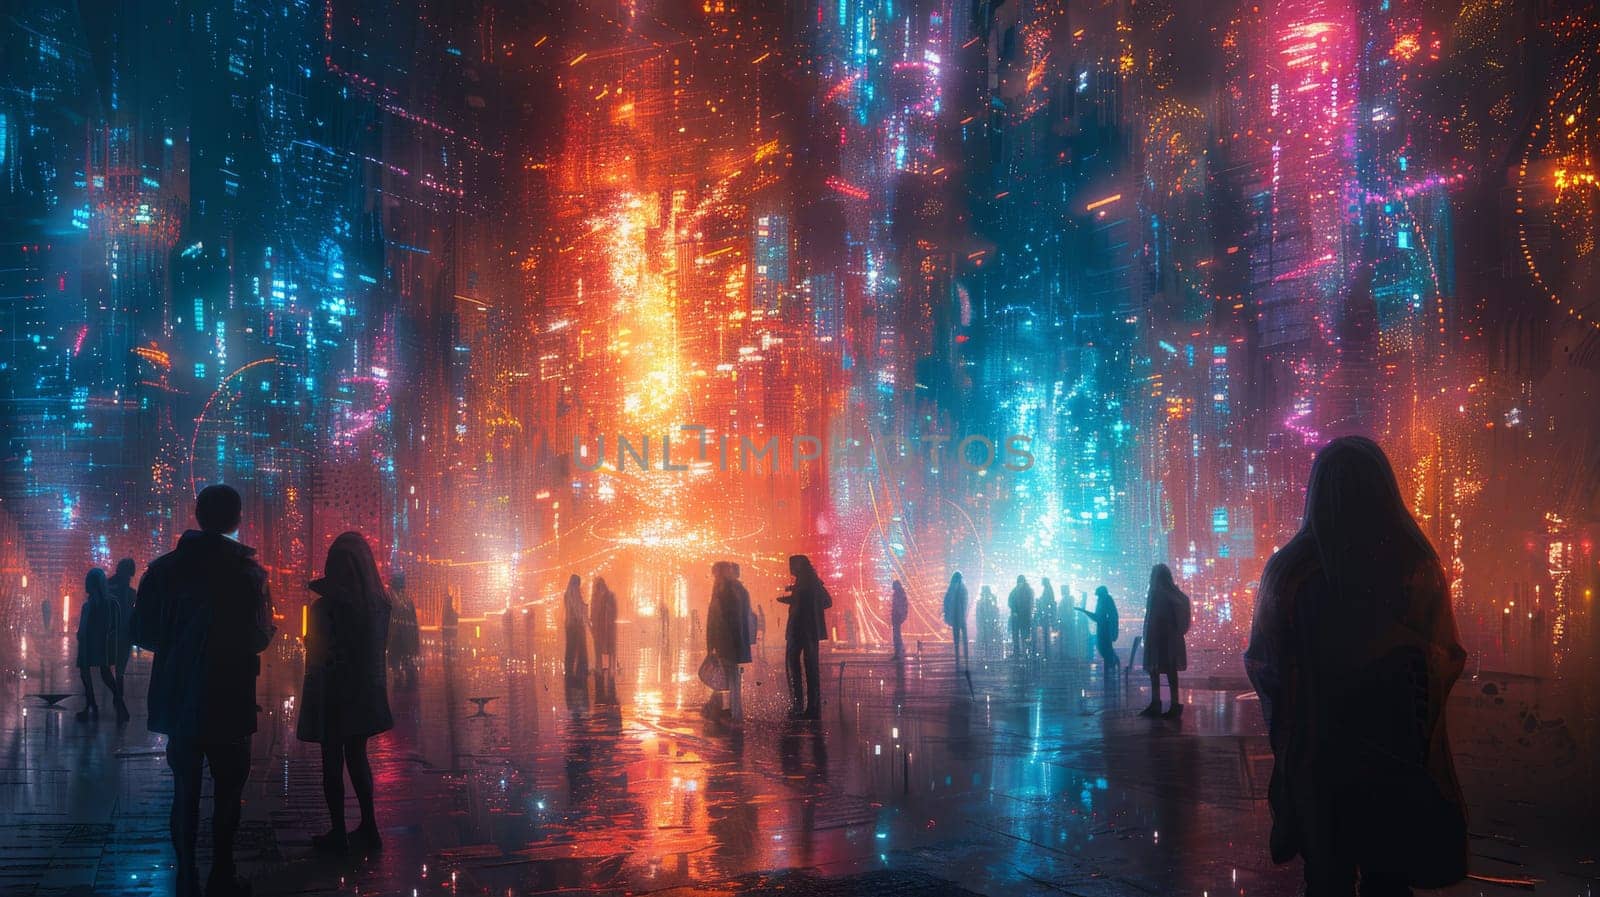 A group of people are walking down a street in a city with neon lights and a colorful sky